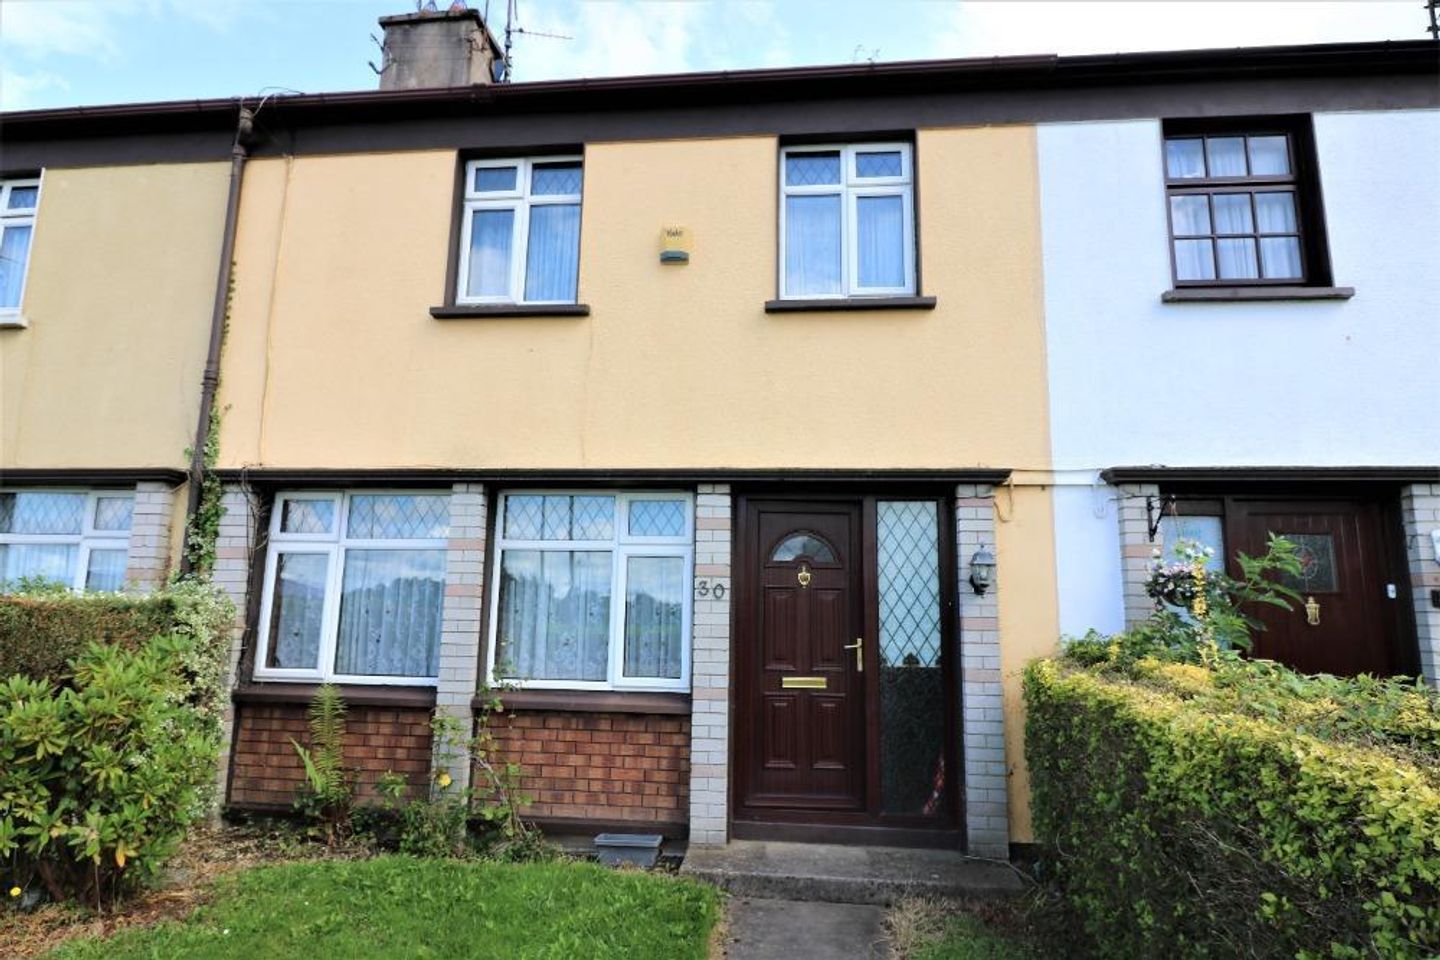 30 Collins Park, Carrick on Suir, Carrick-on-Suir, Co. Tipperary, E32PH36